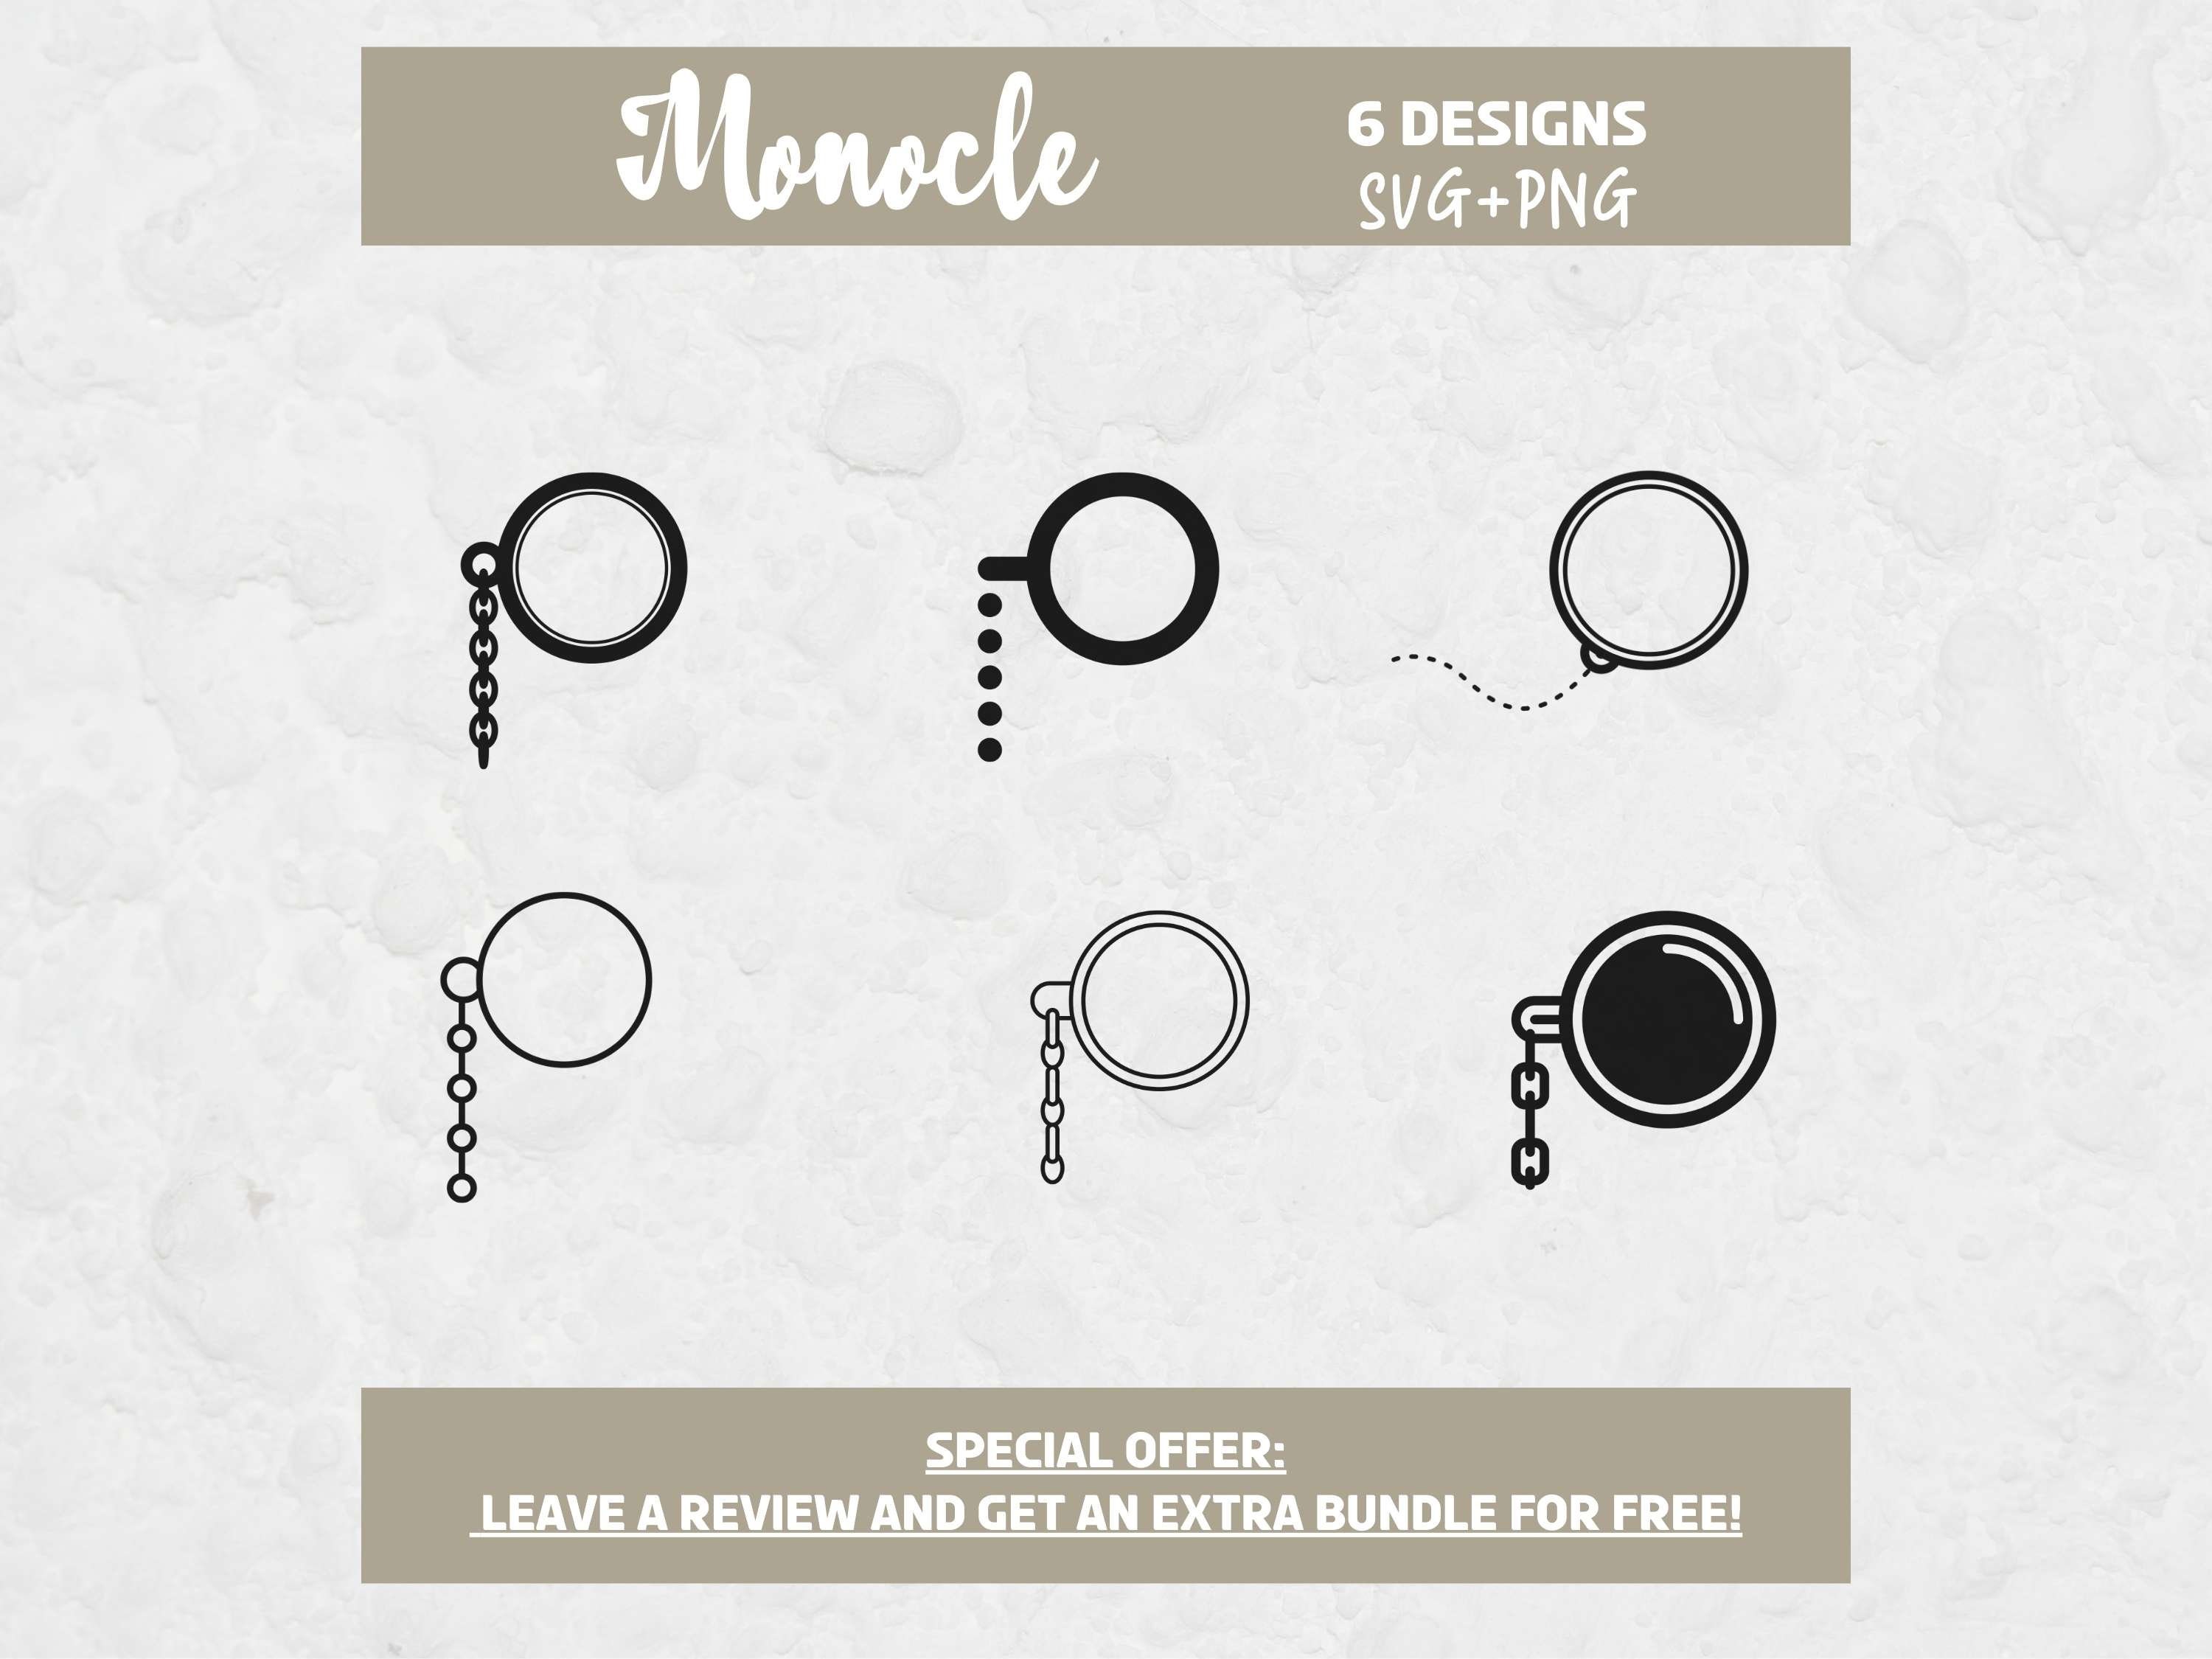 Chain Monocle Glass Vector Images (over 140)